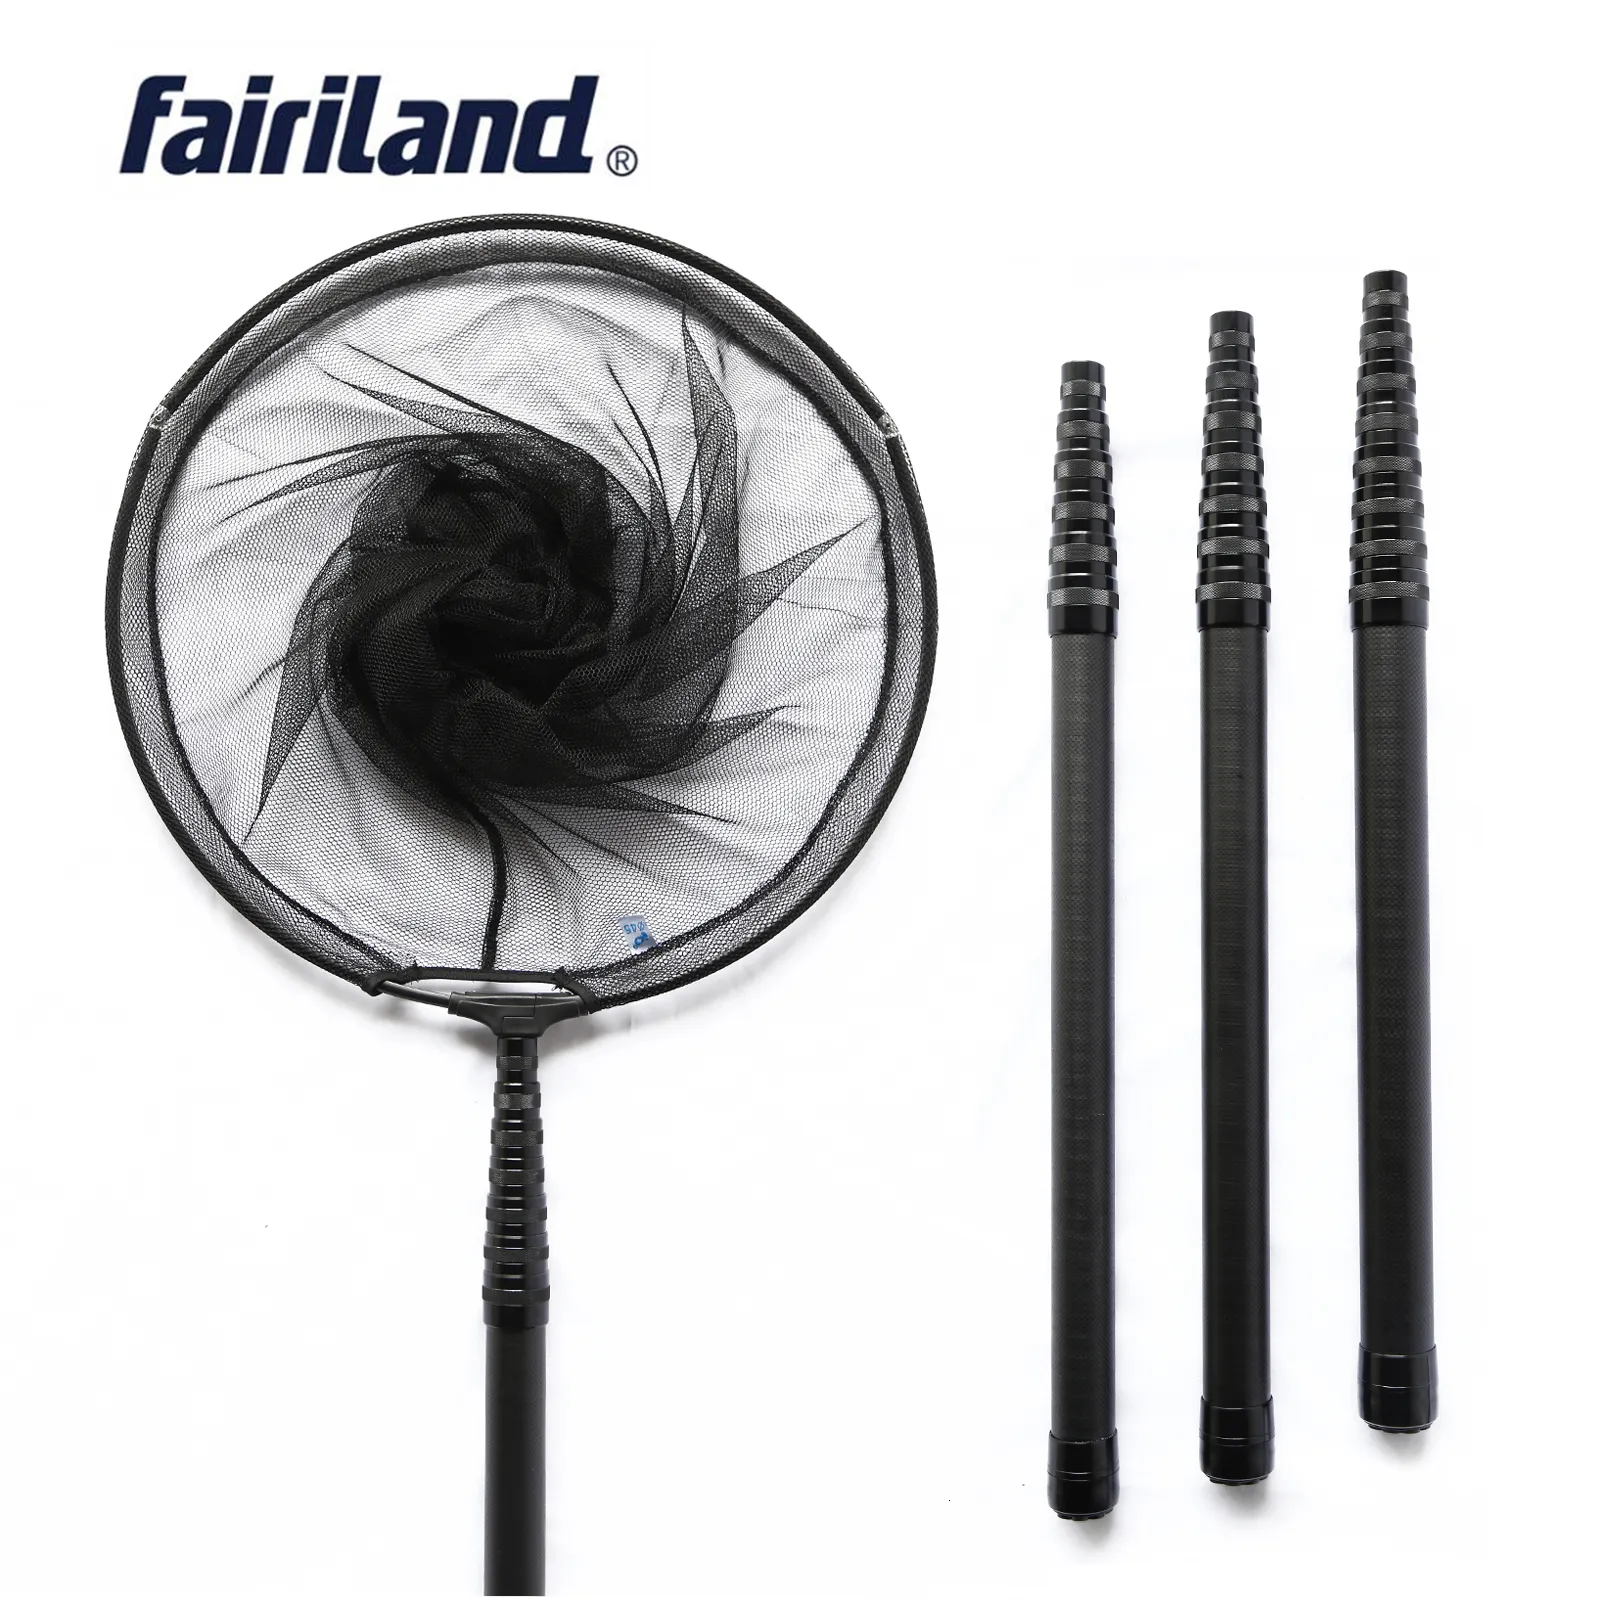 Fishing Accessories 1.8-3.45m High Quality Carbon Fishing Net Fish Landing Hand Net Foldable Collapsible Telescopic Pole Handle Fishing Tackle 230729